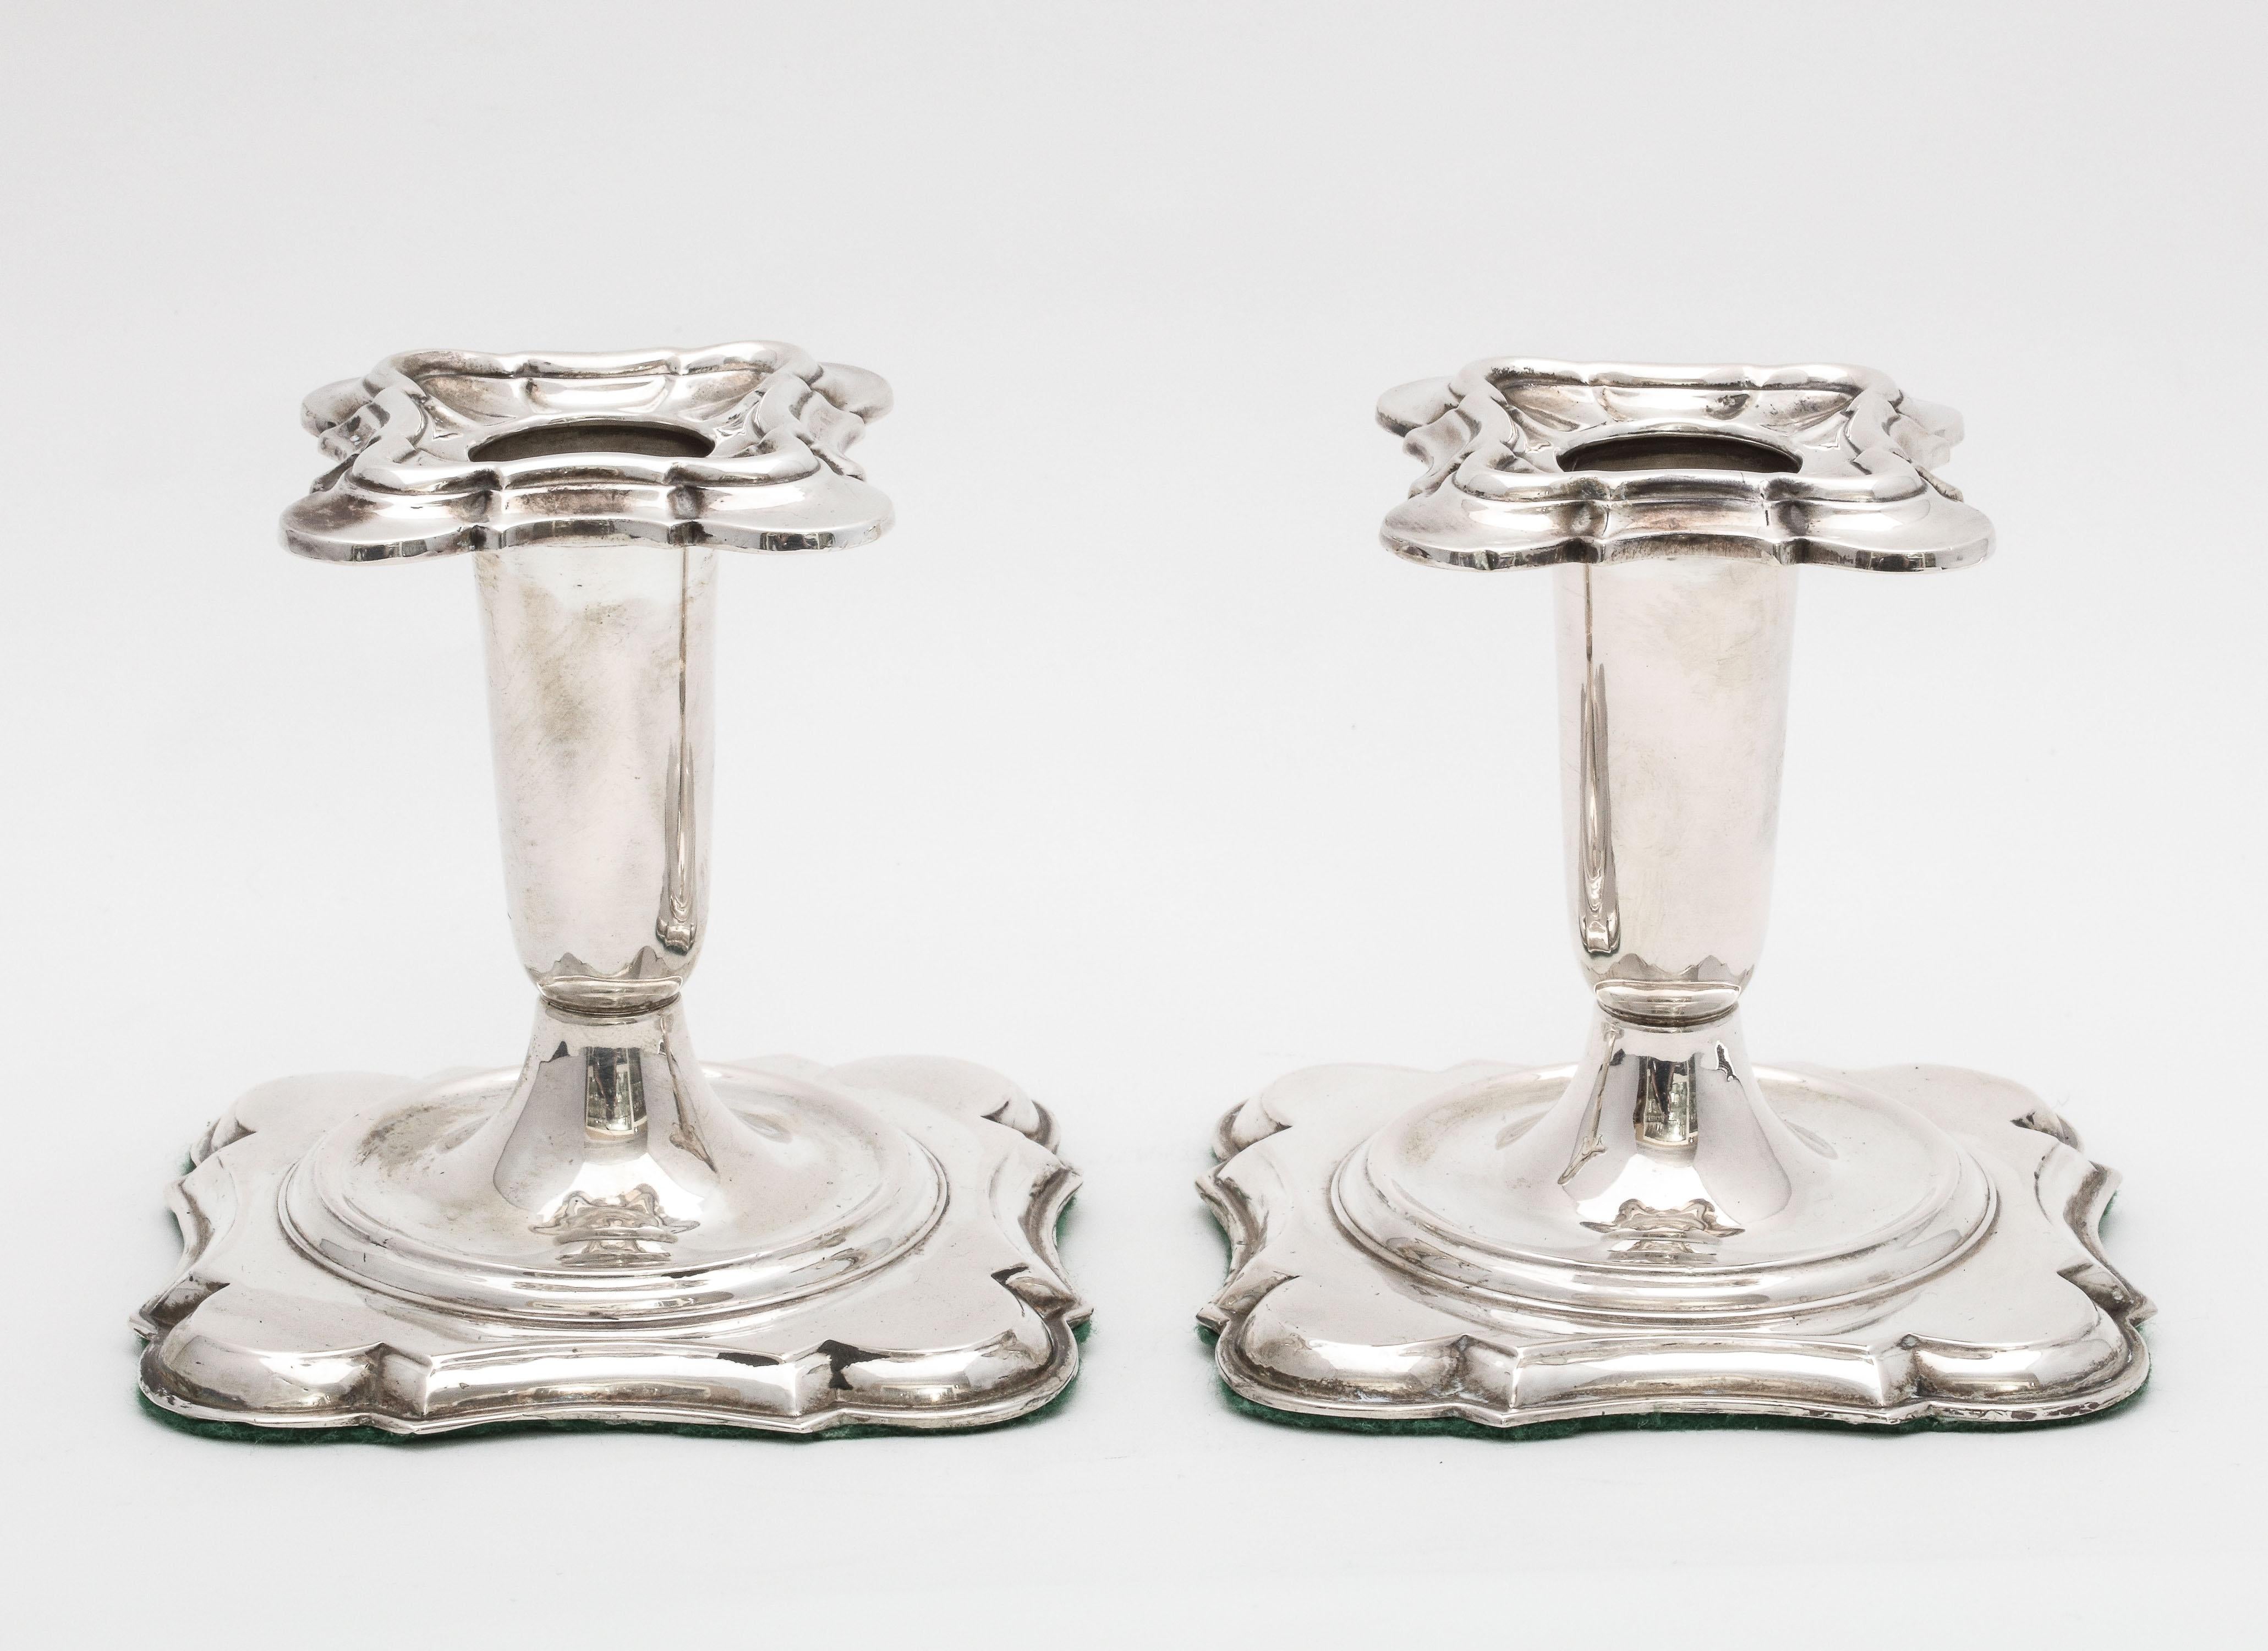 Georgian- style pair of continental silver (.835) candlesticks, Norway, circa 1930s, Theodor Olsens, maker. Each of the candlesticks measures 3 3/4 inches high x 3 3/4 inches wide x 3 3/4 inches deep. Base of each candlestick is weighted and is